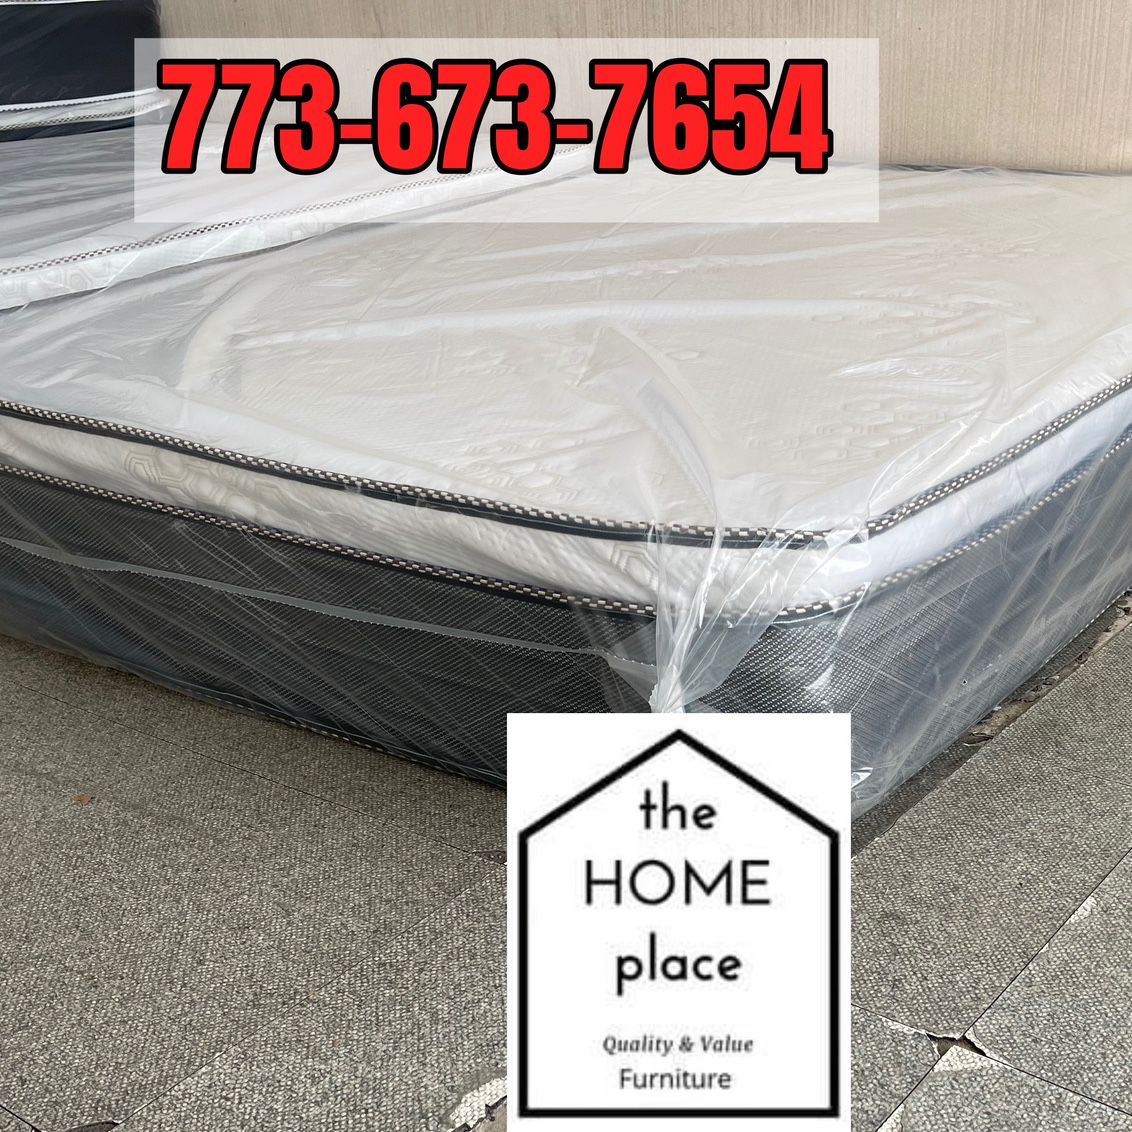 Top Quality Brand New Mattresses On Sale 🚨 - We Deliver 🚛 (Starting Price $99)